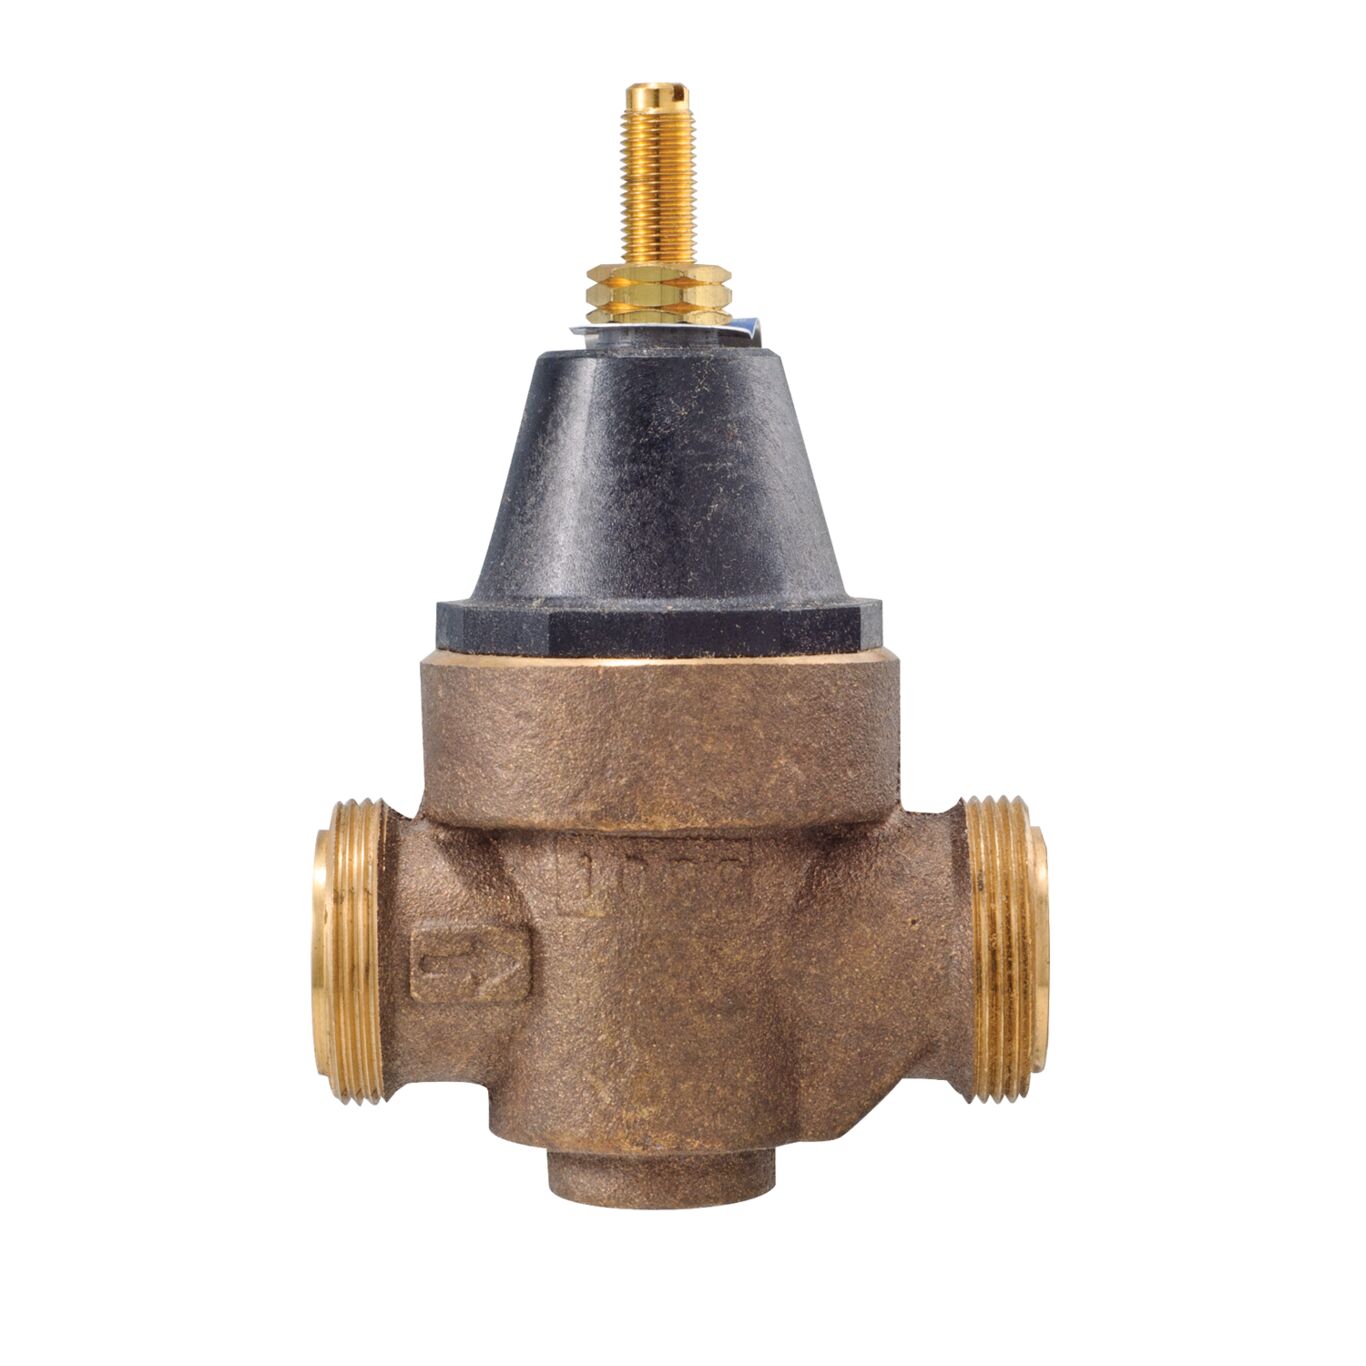 Product Image - PRV-1 Small